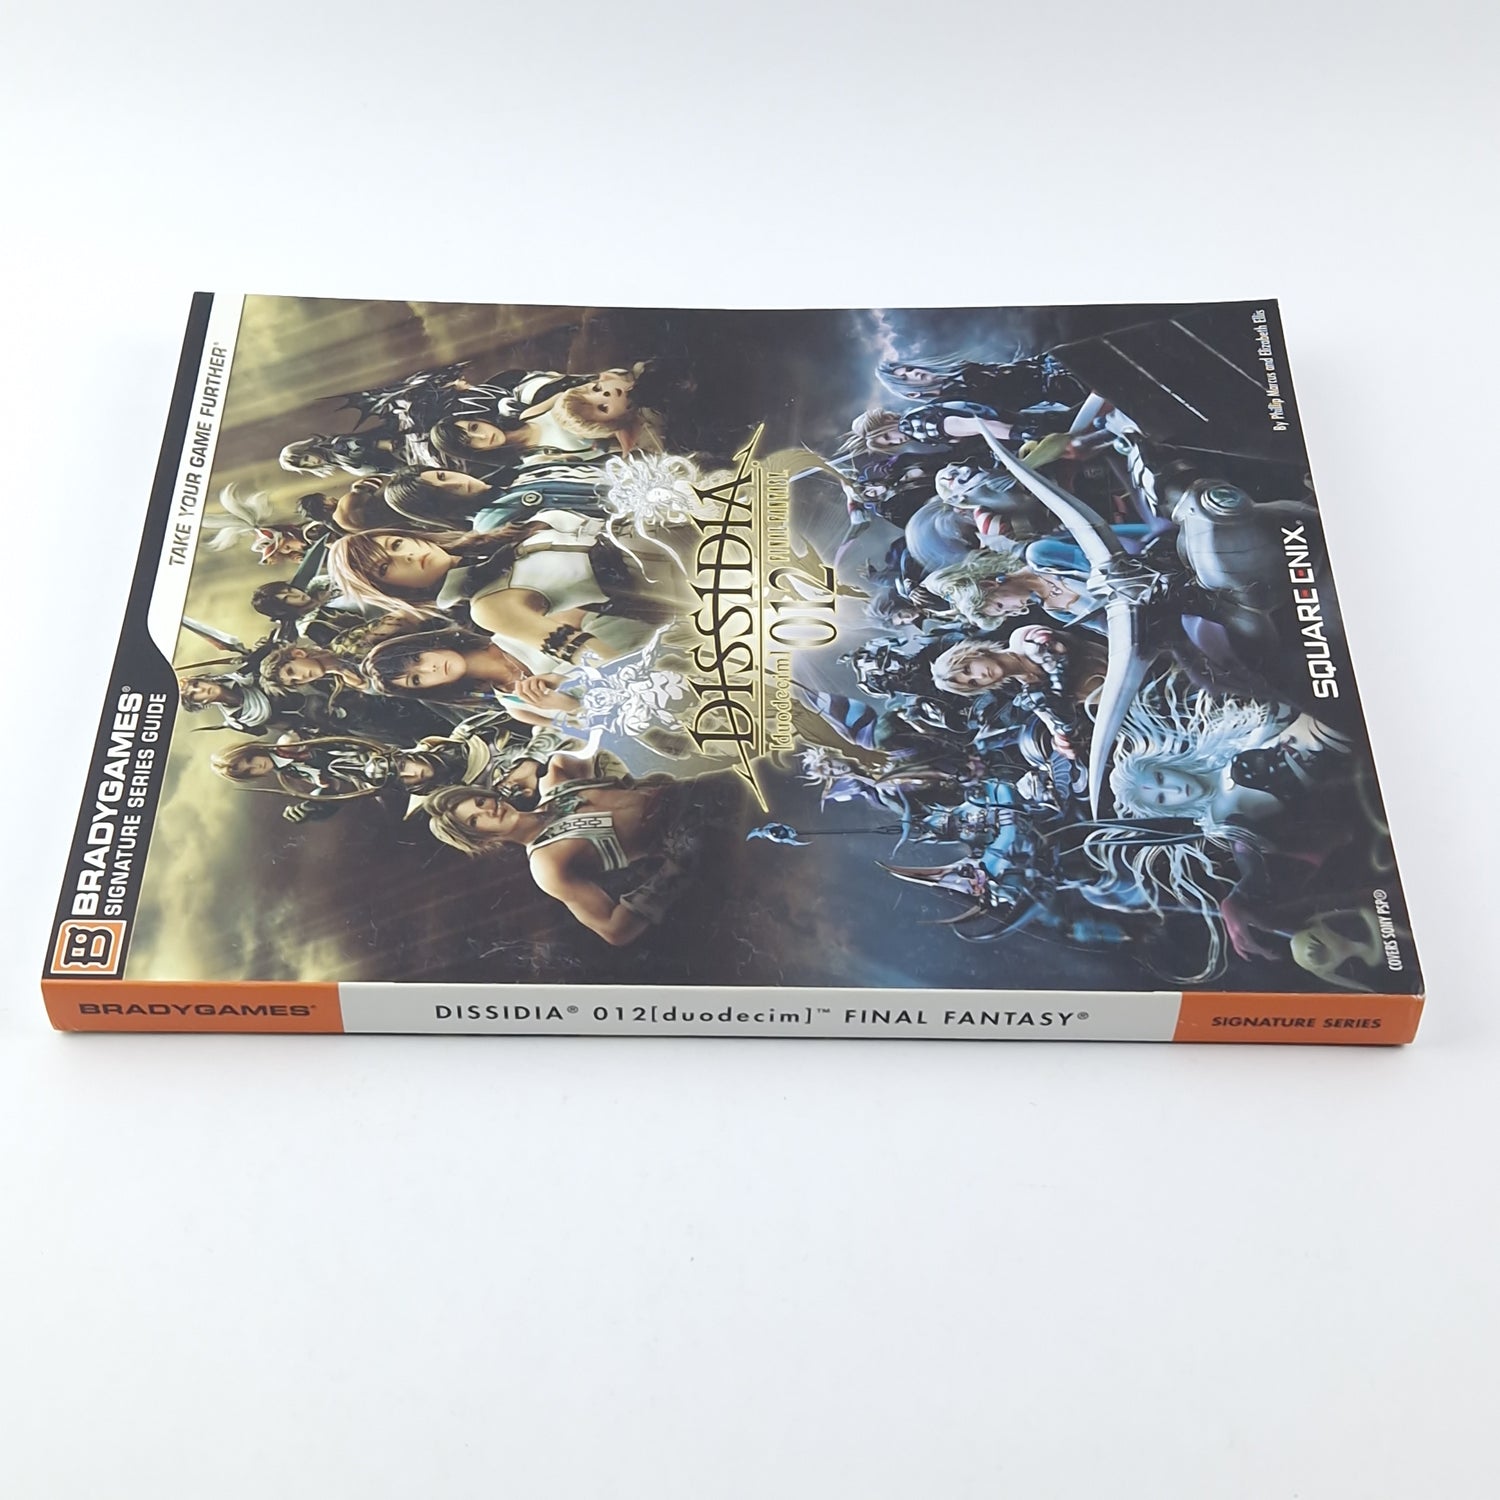 Playstation Portable Game : Dissidia Final Fantasy 012 + Bradygames Guide - PSP